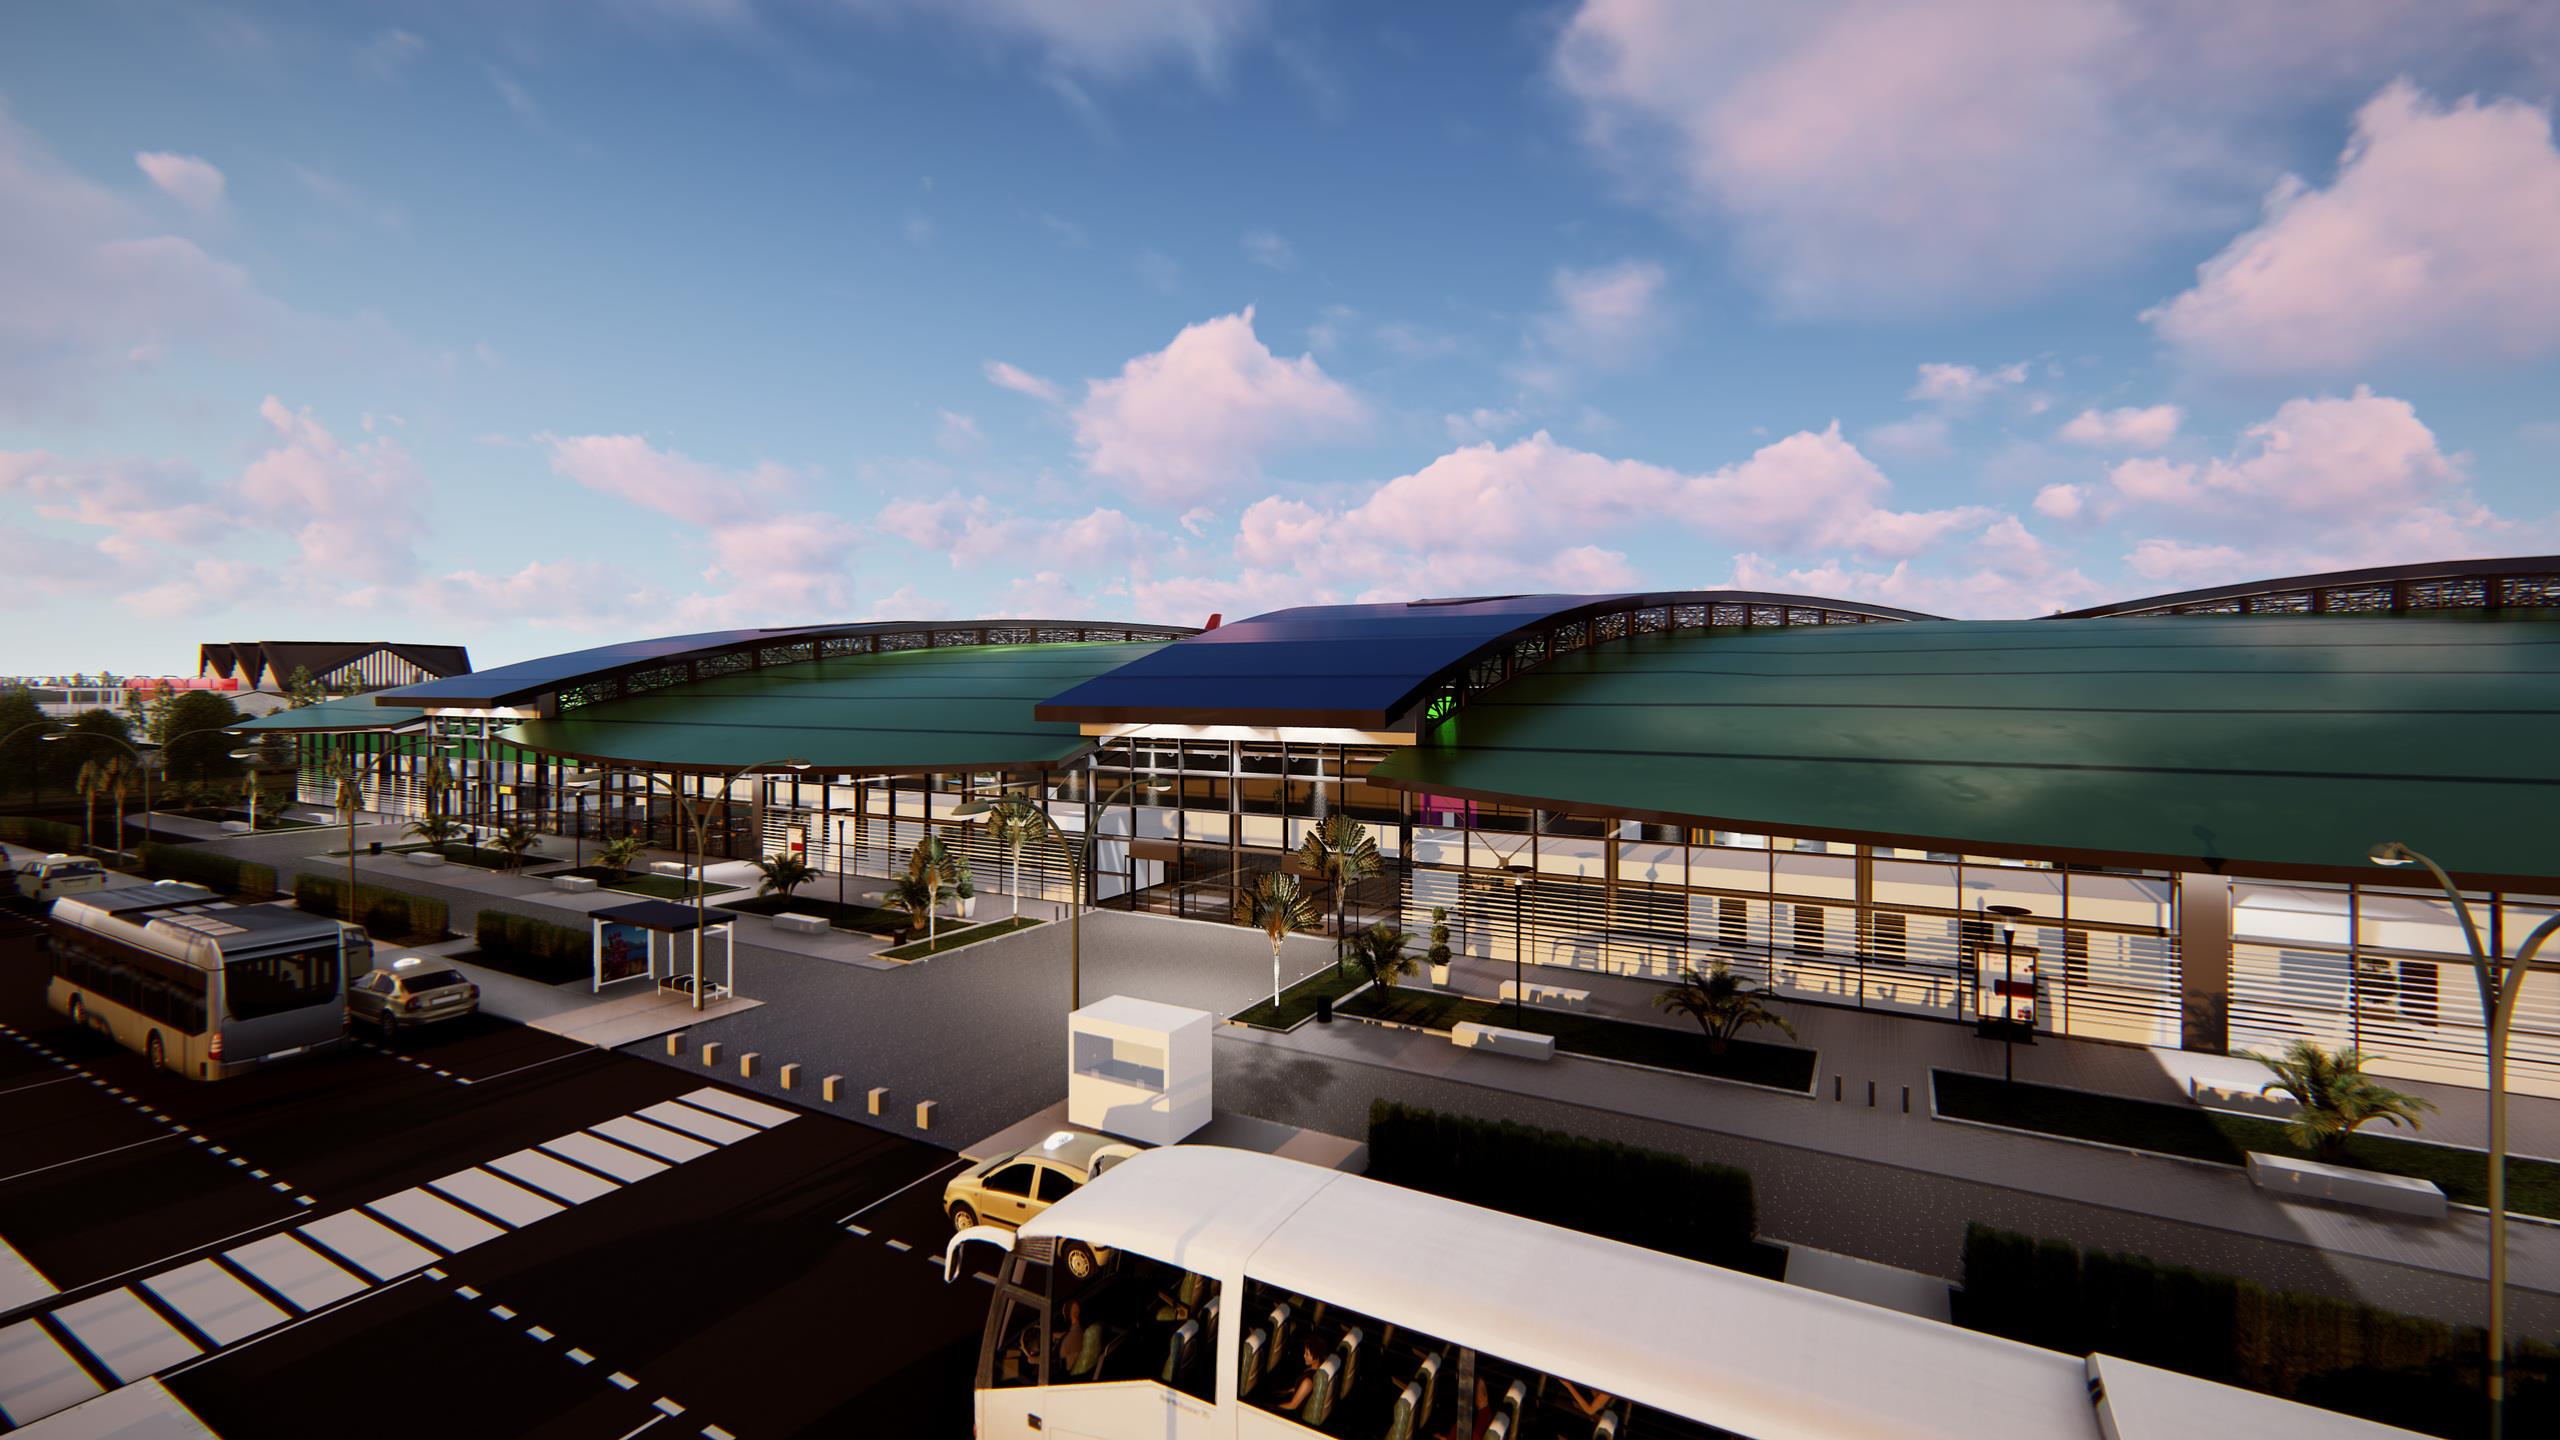 Building information modelling (BIM) image of what the modern airport facilities in Madagascar will look like once complete.